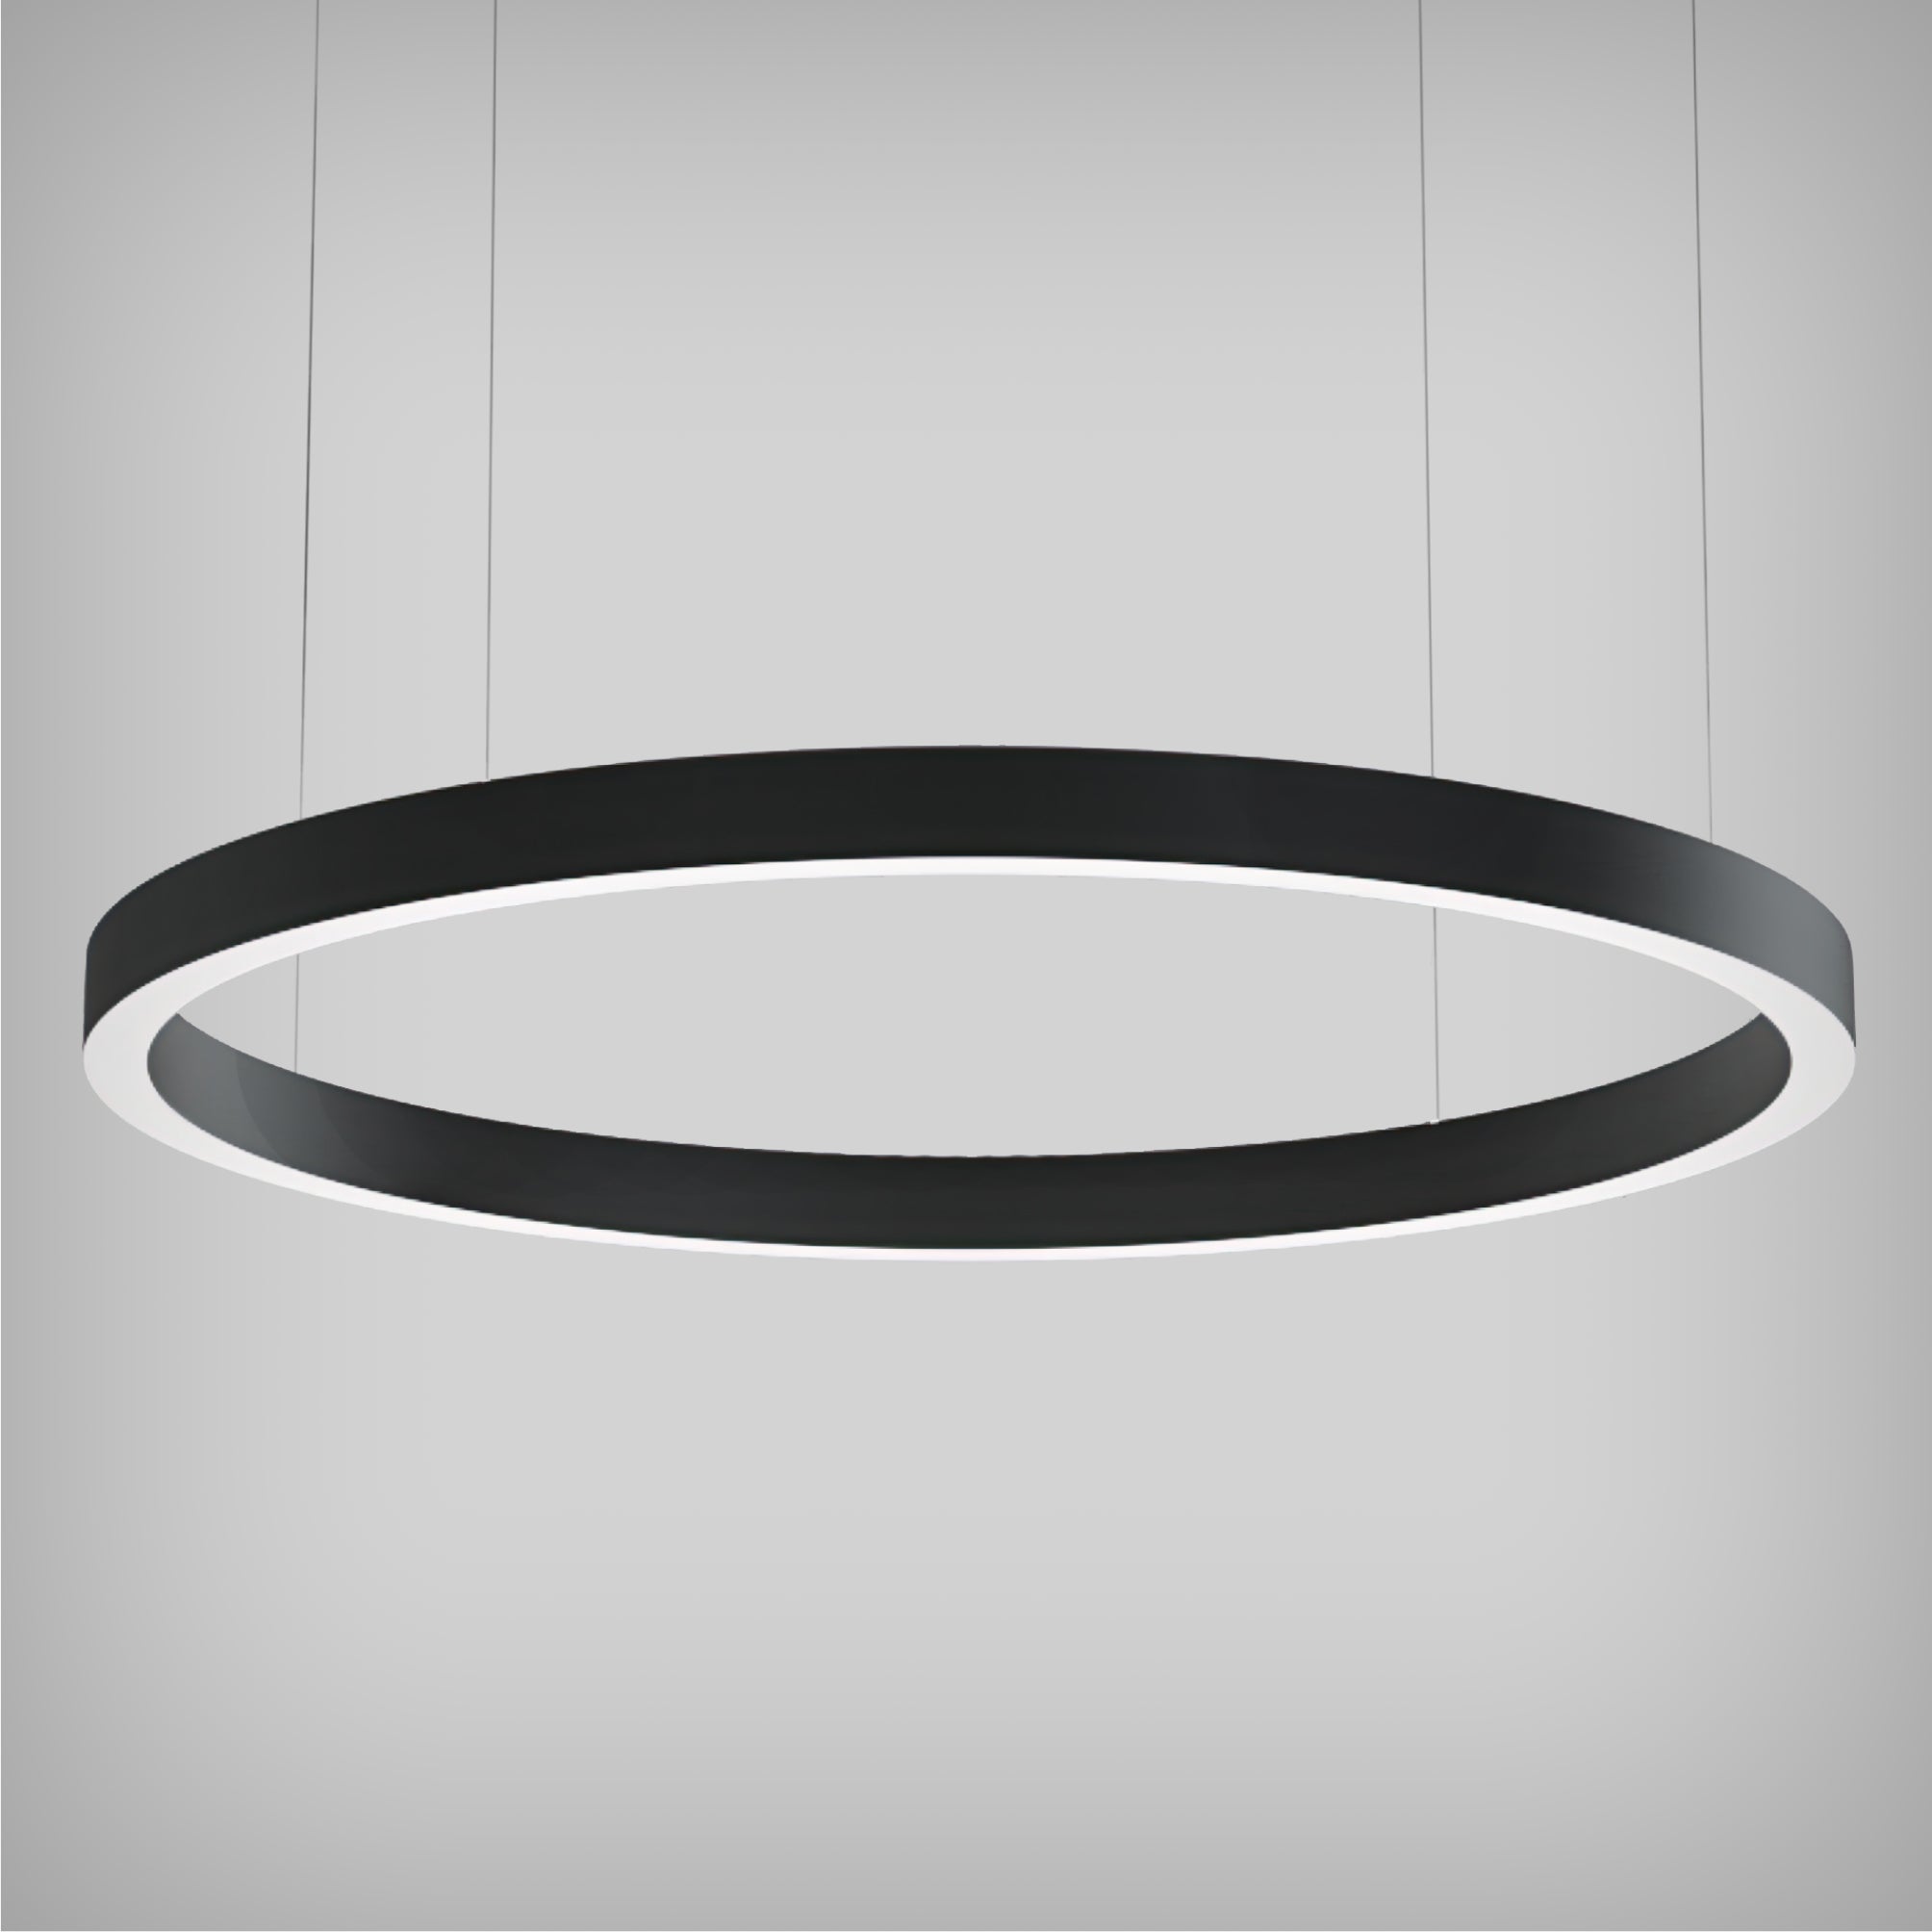 LED Ring Pendant Uplight and Downlight - Large Round Chandelier